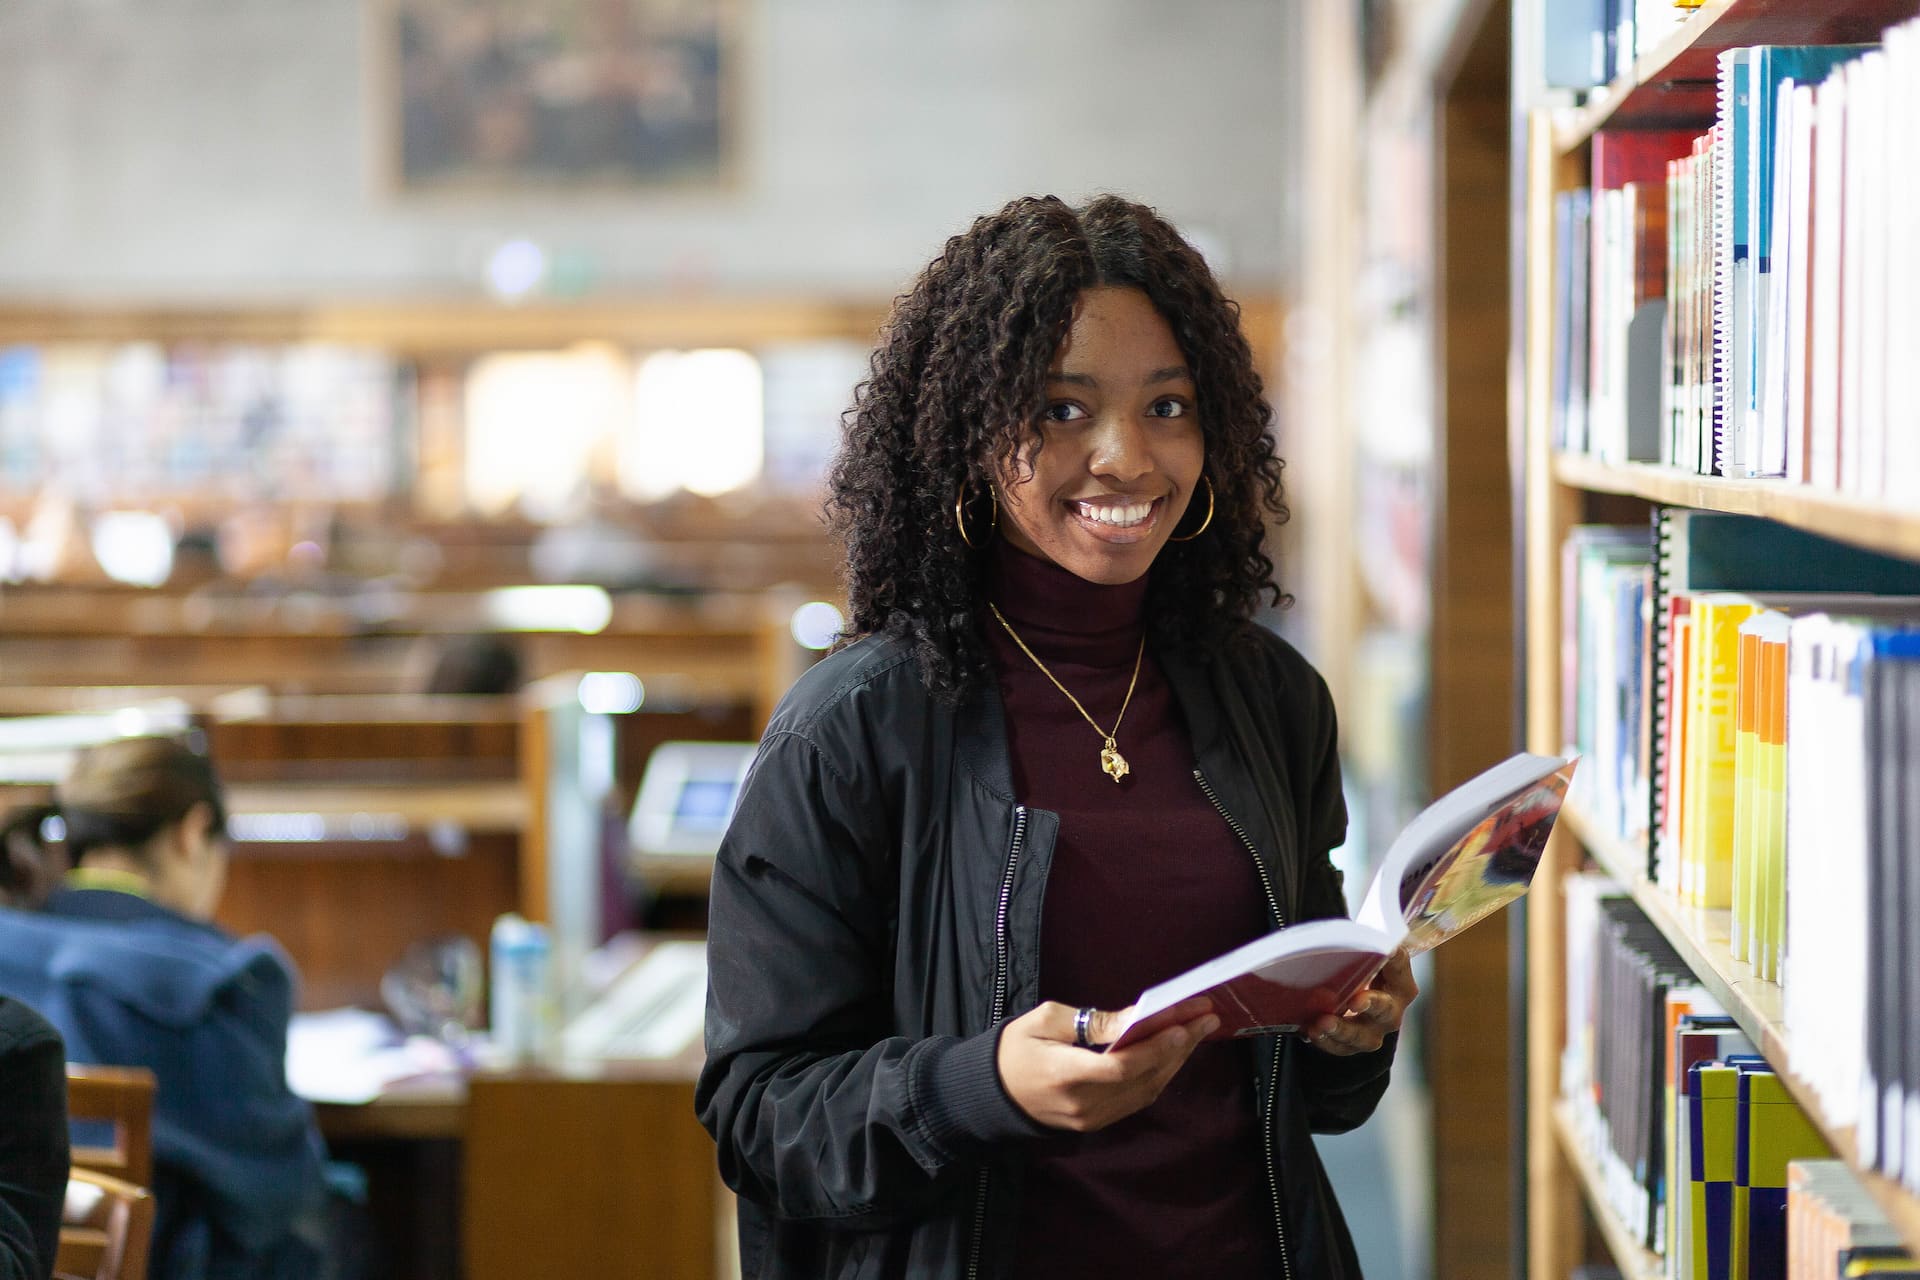 Student in library holding a book smiling at camera